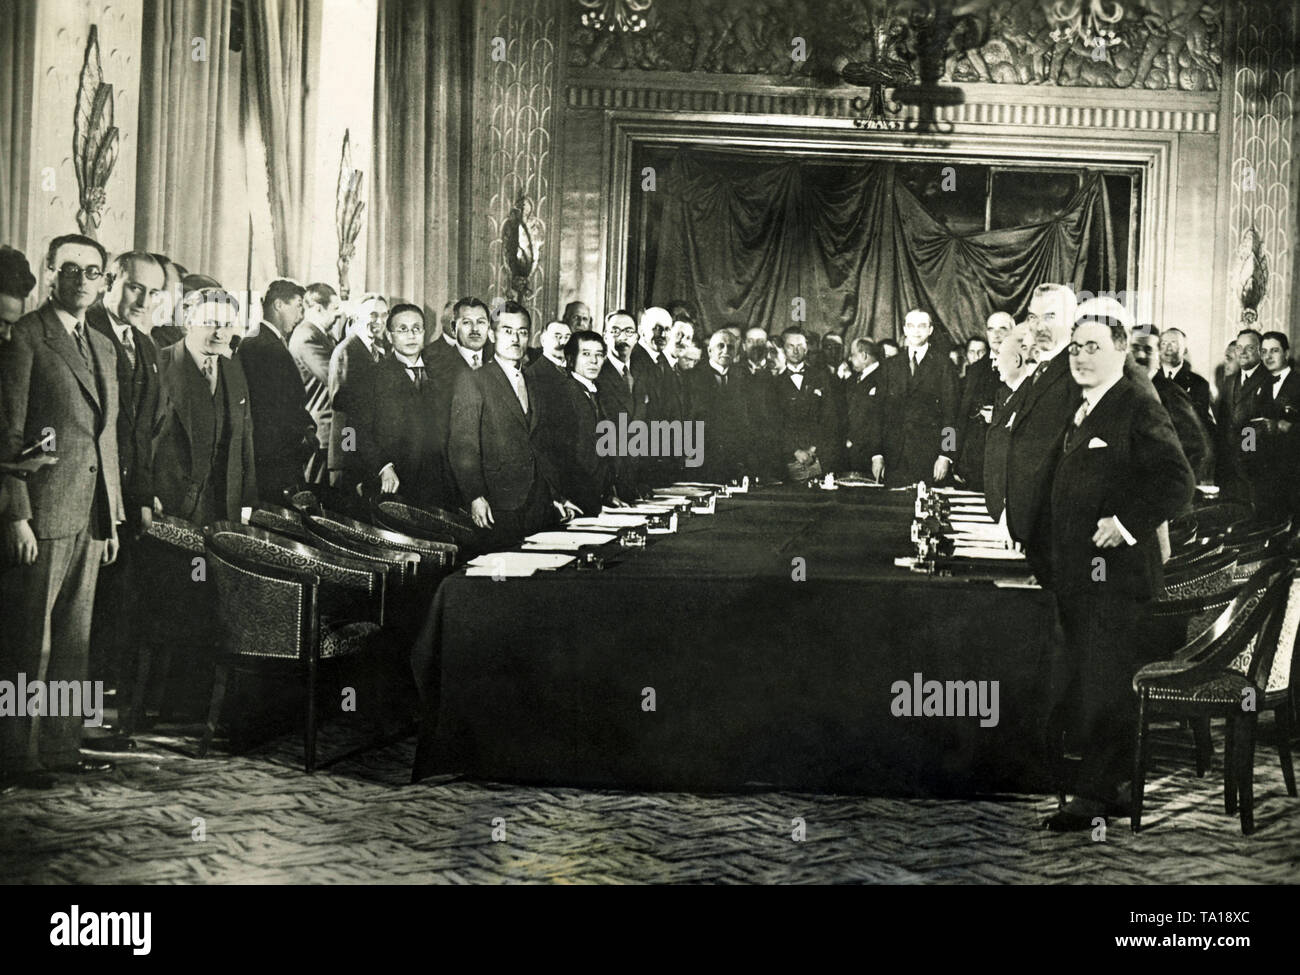 The representatives of the belligerent powers met in the Hotel George V to discuss the reparation payments of Germany. The German representatives pointed out in vain the economic weakness of Germany. Here is the opening of the conference. Standing at the front of the table: in the center Owen Young, at the left corner Moreau and at right Morgan. On the right, 3rd from the front German expert, Voegler. Stock Photo